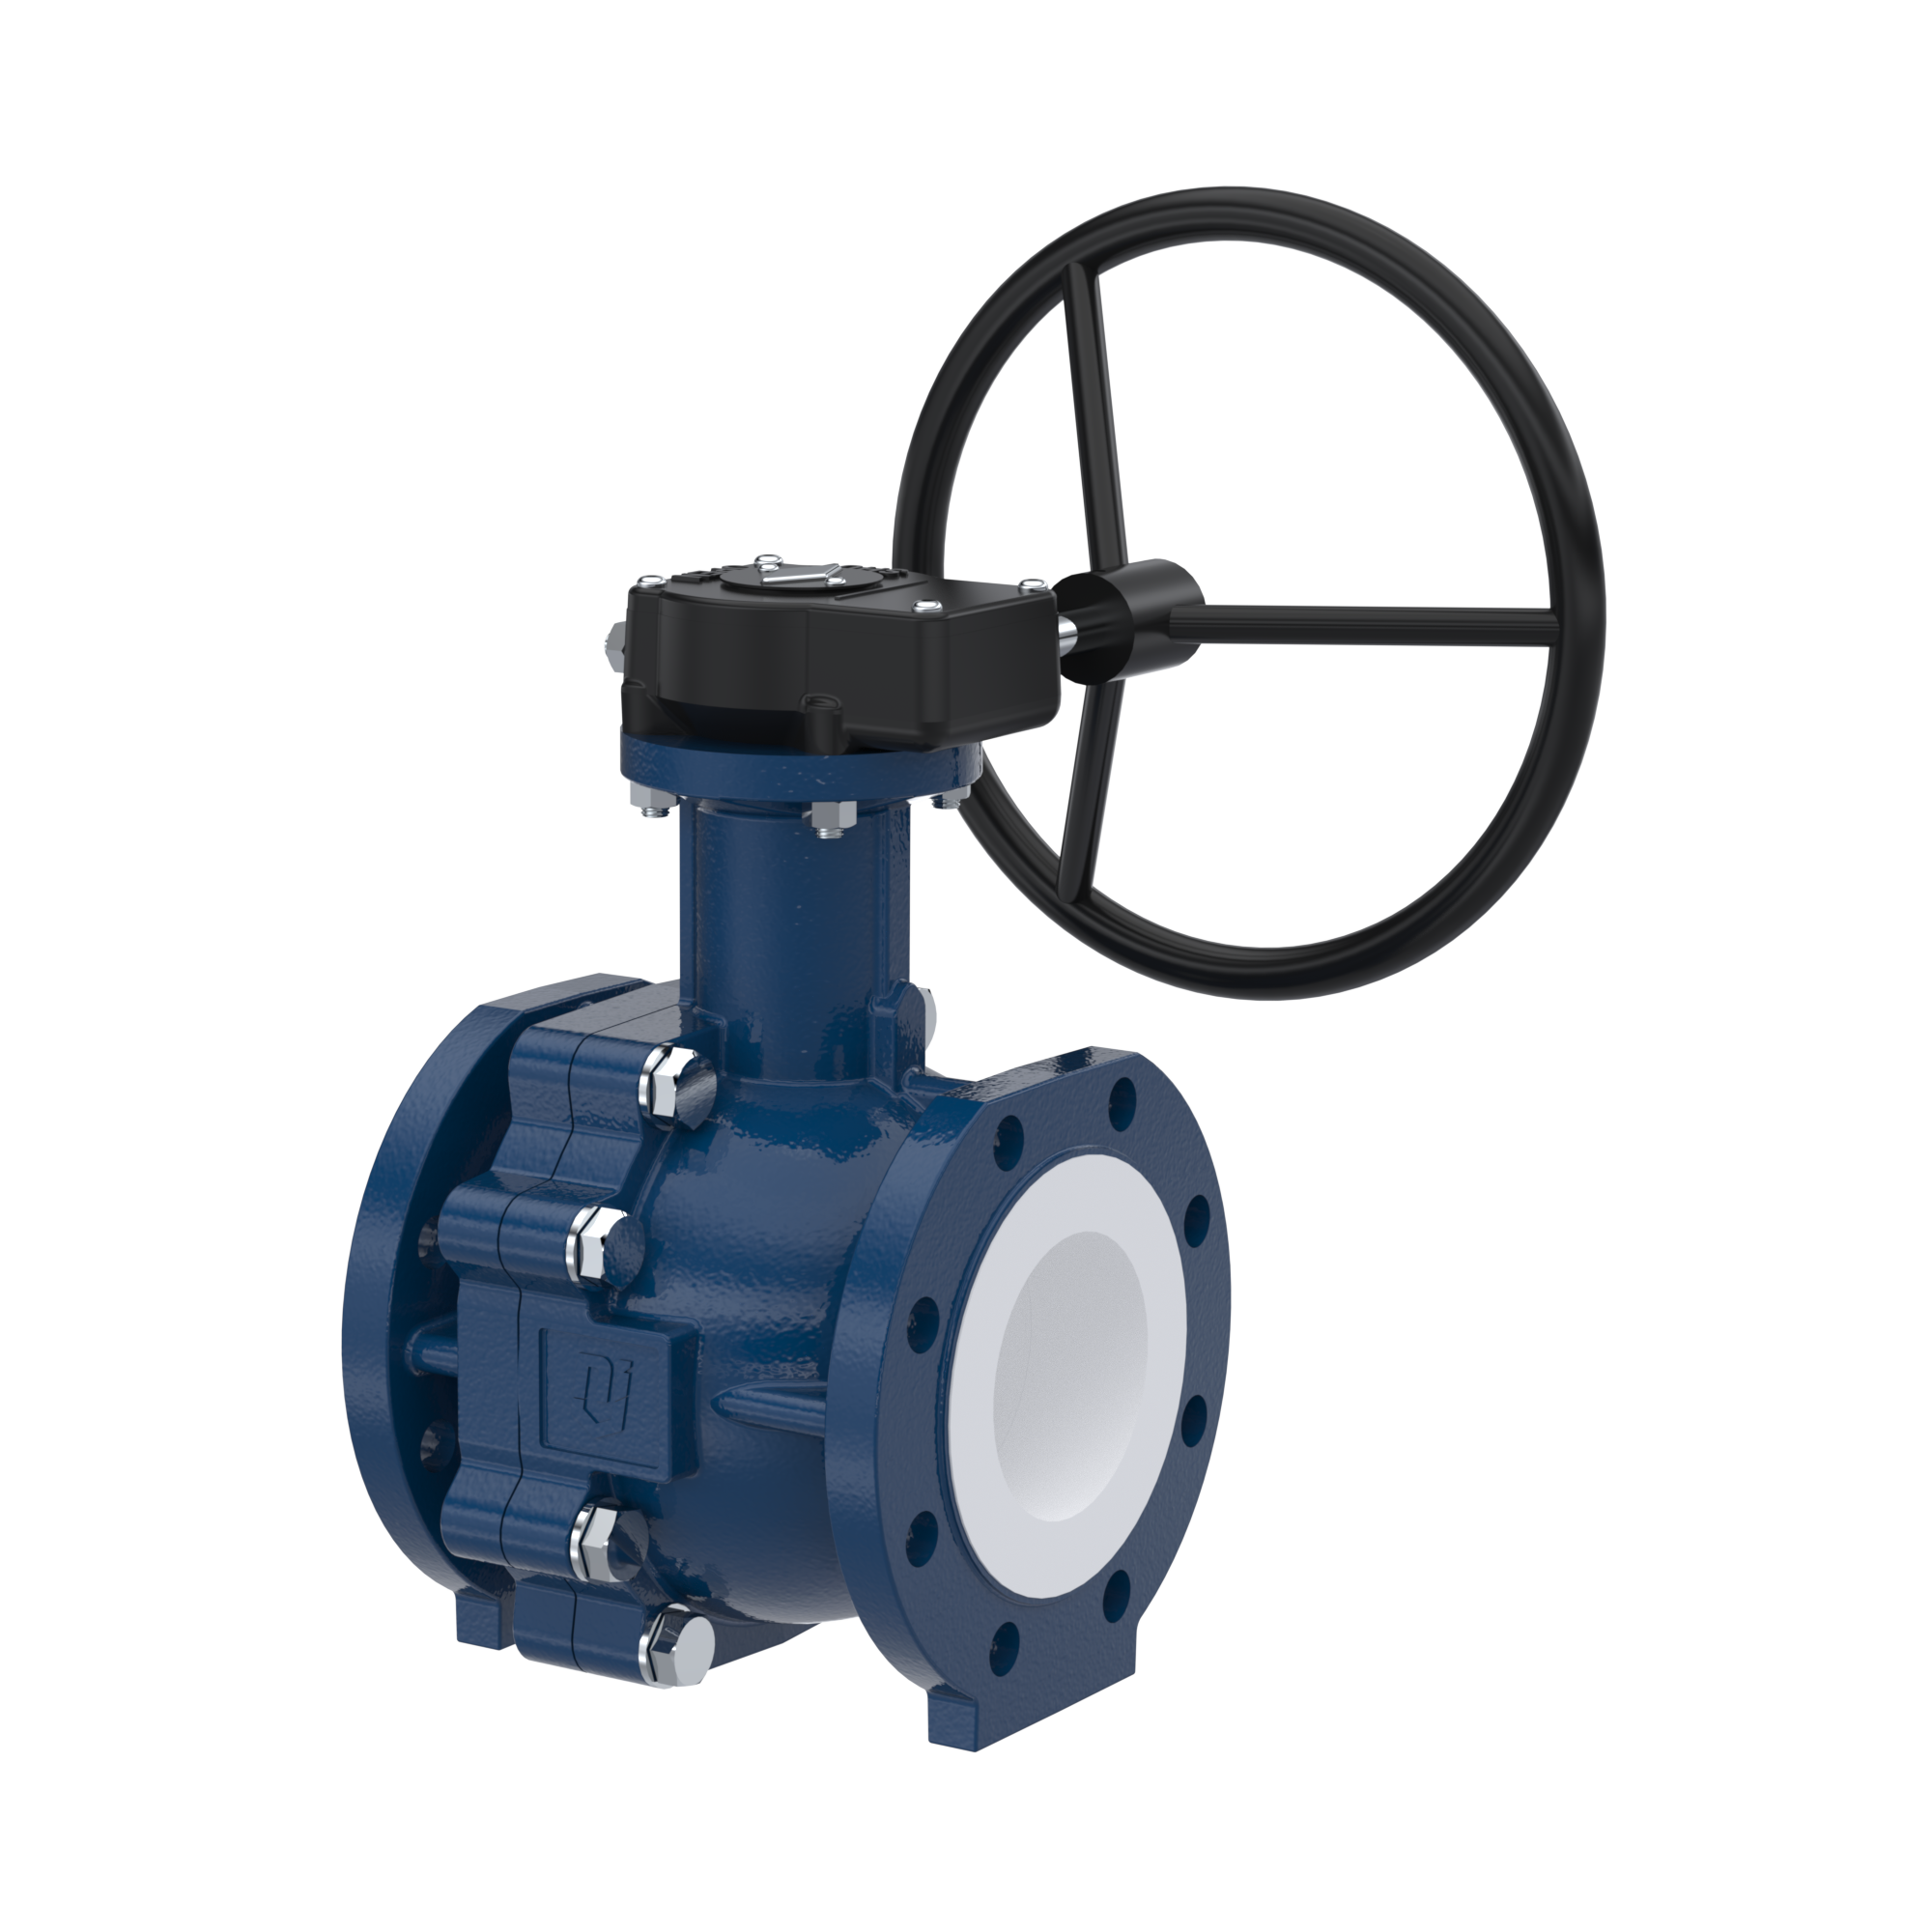 PFA-flange ball valve FK13 DN100 - 4" inch ANSI 150 made of spheroidal graphite cast iron with worm gear